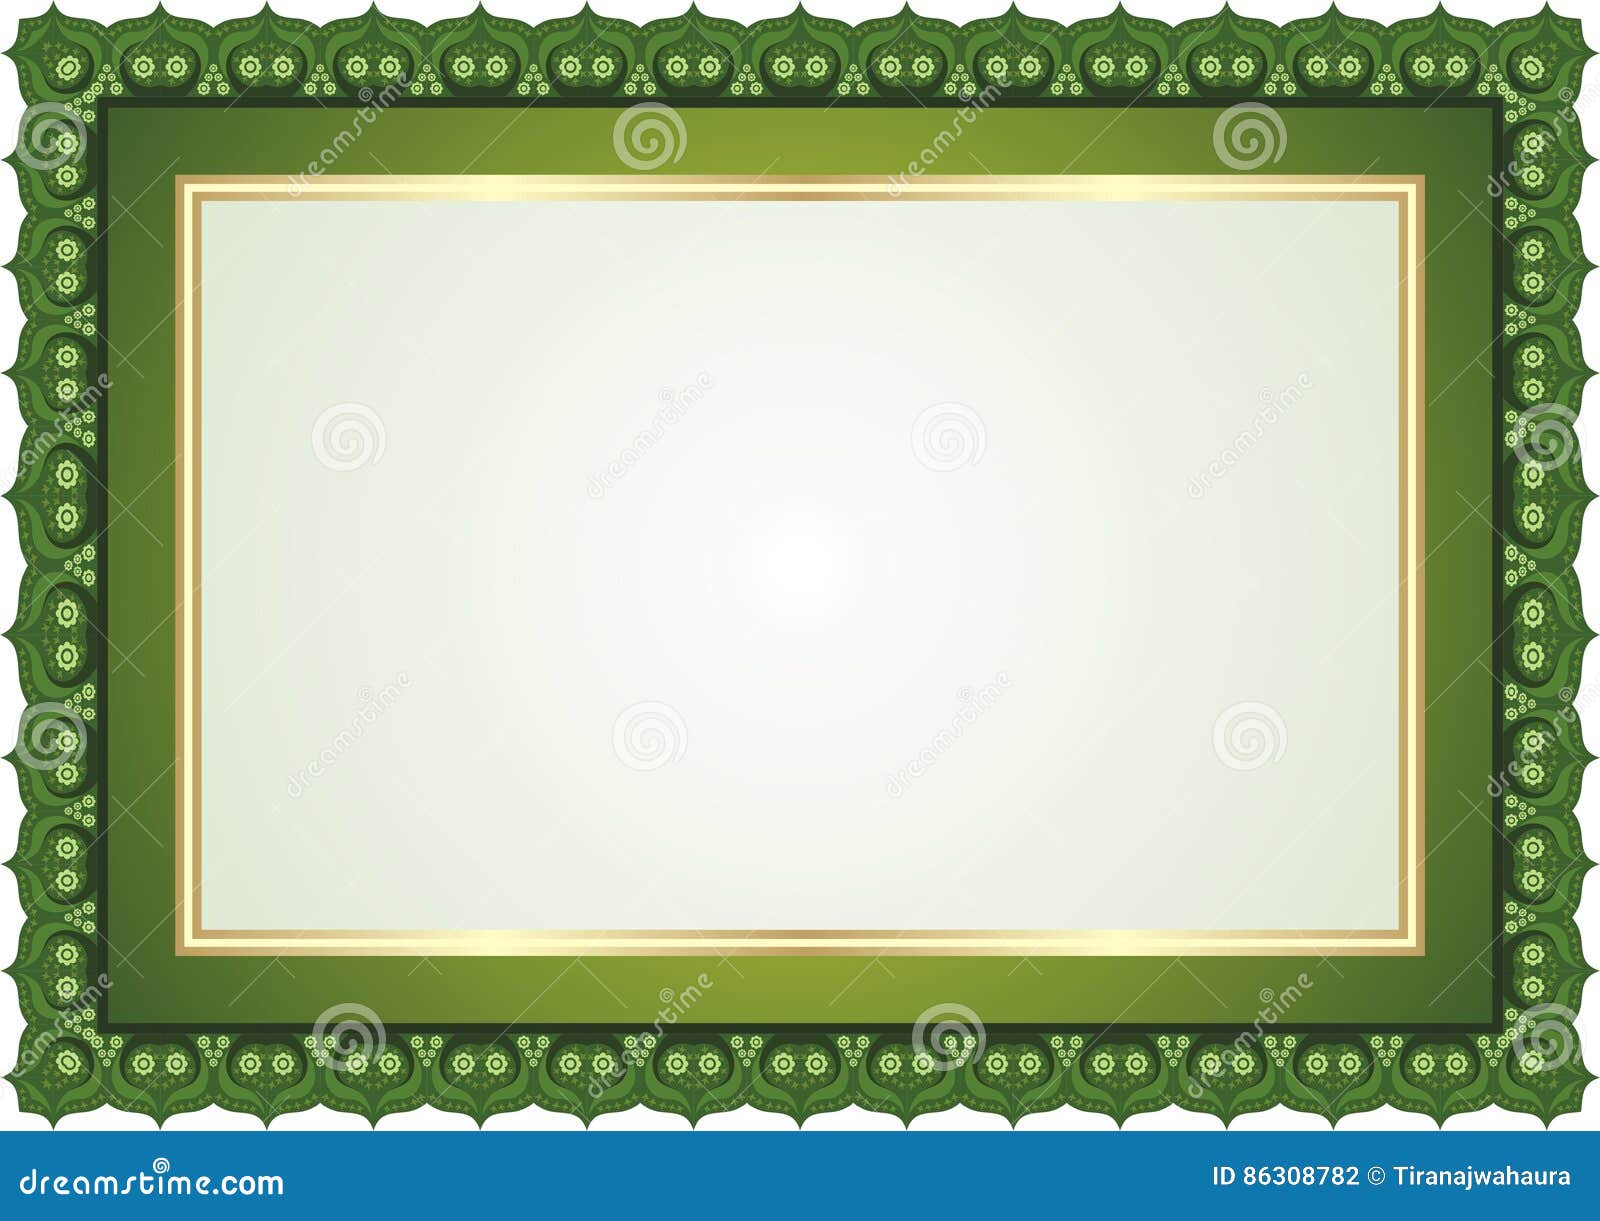 Frame - Border With Green Color Style Design Vector ...
 Color Borders Design